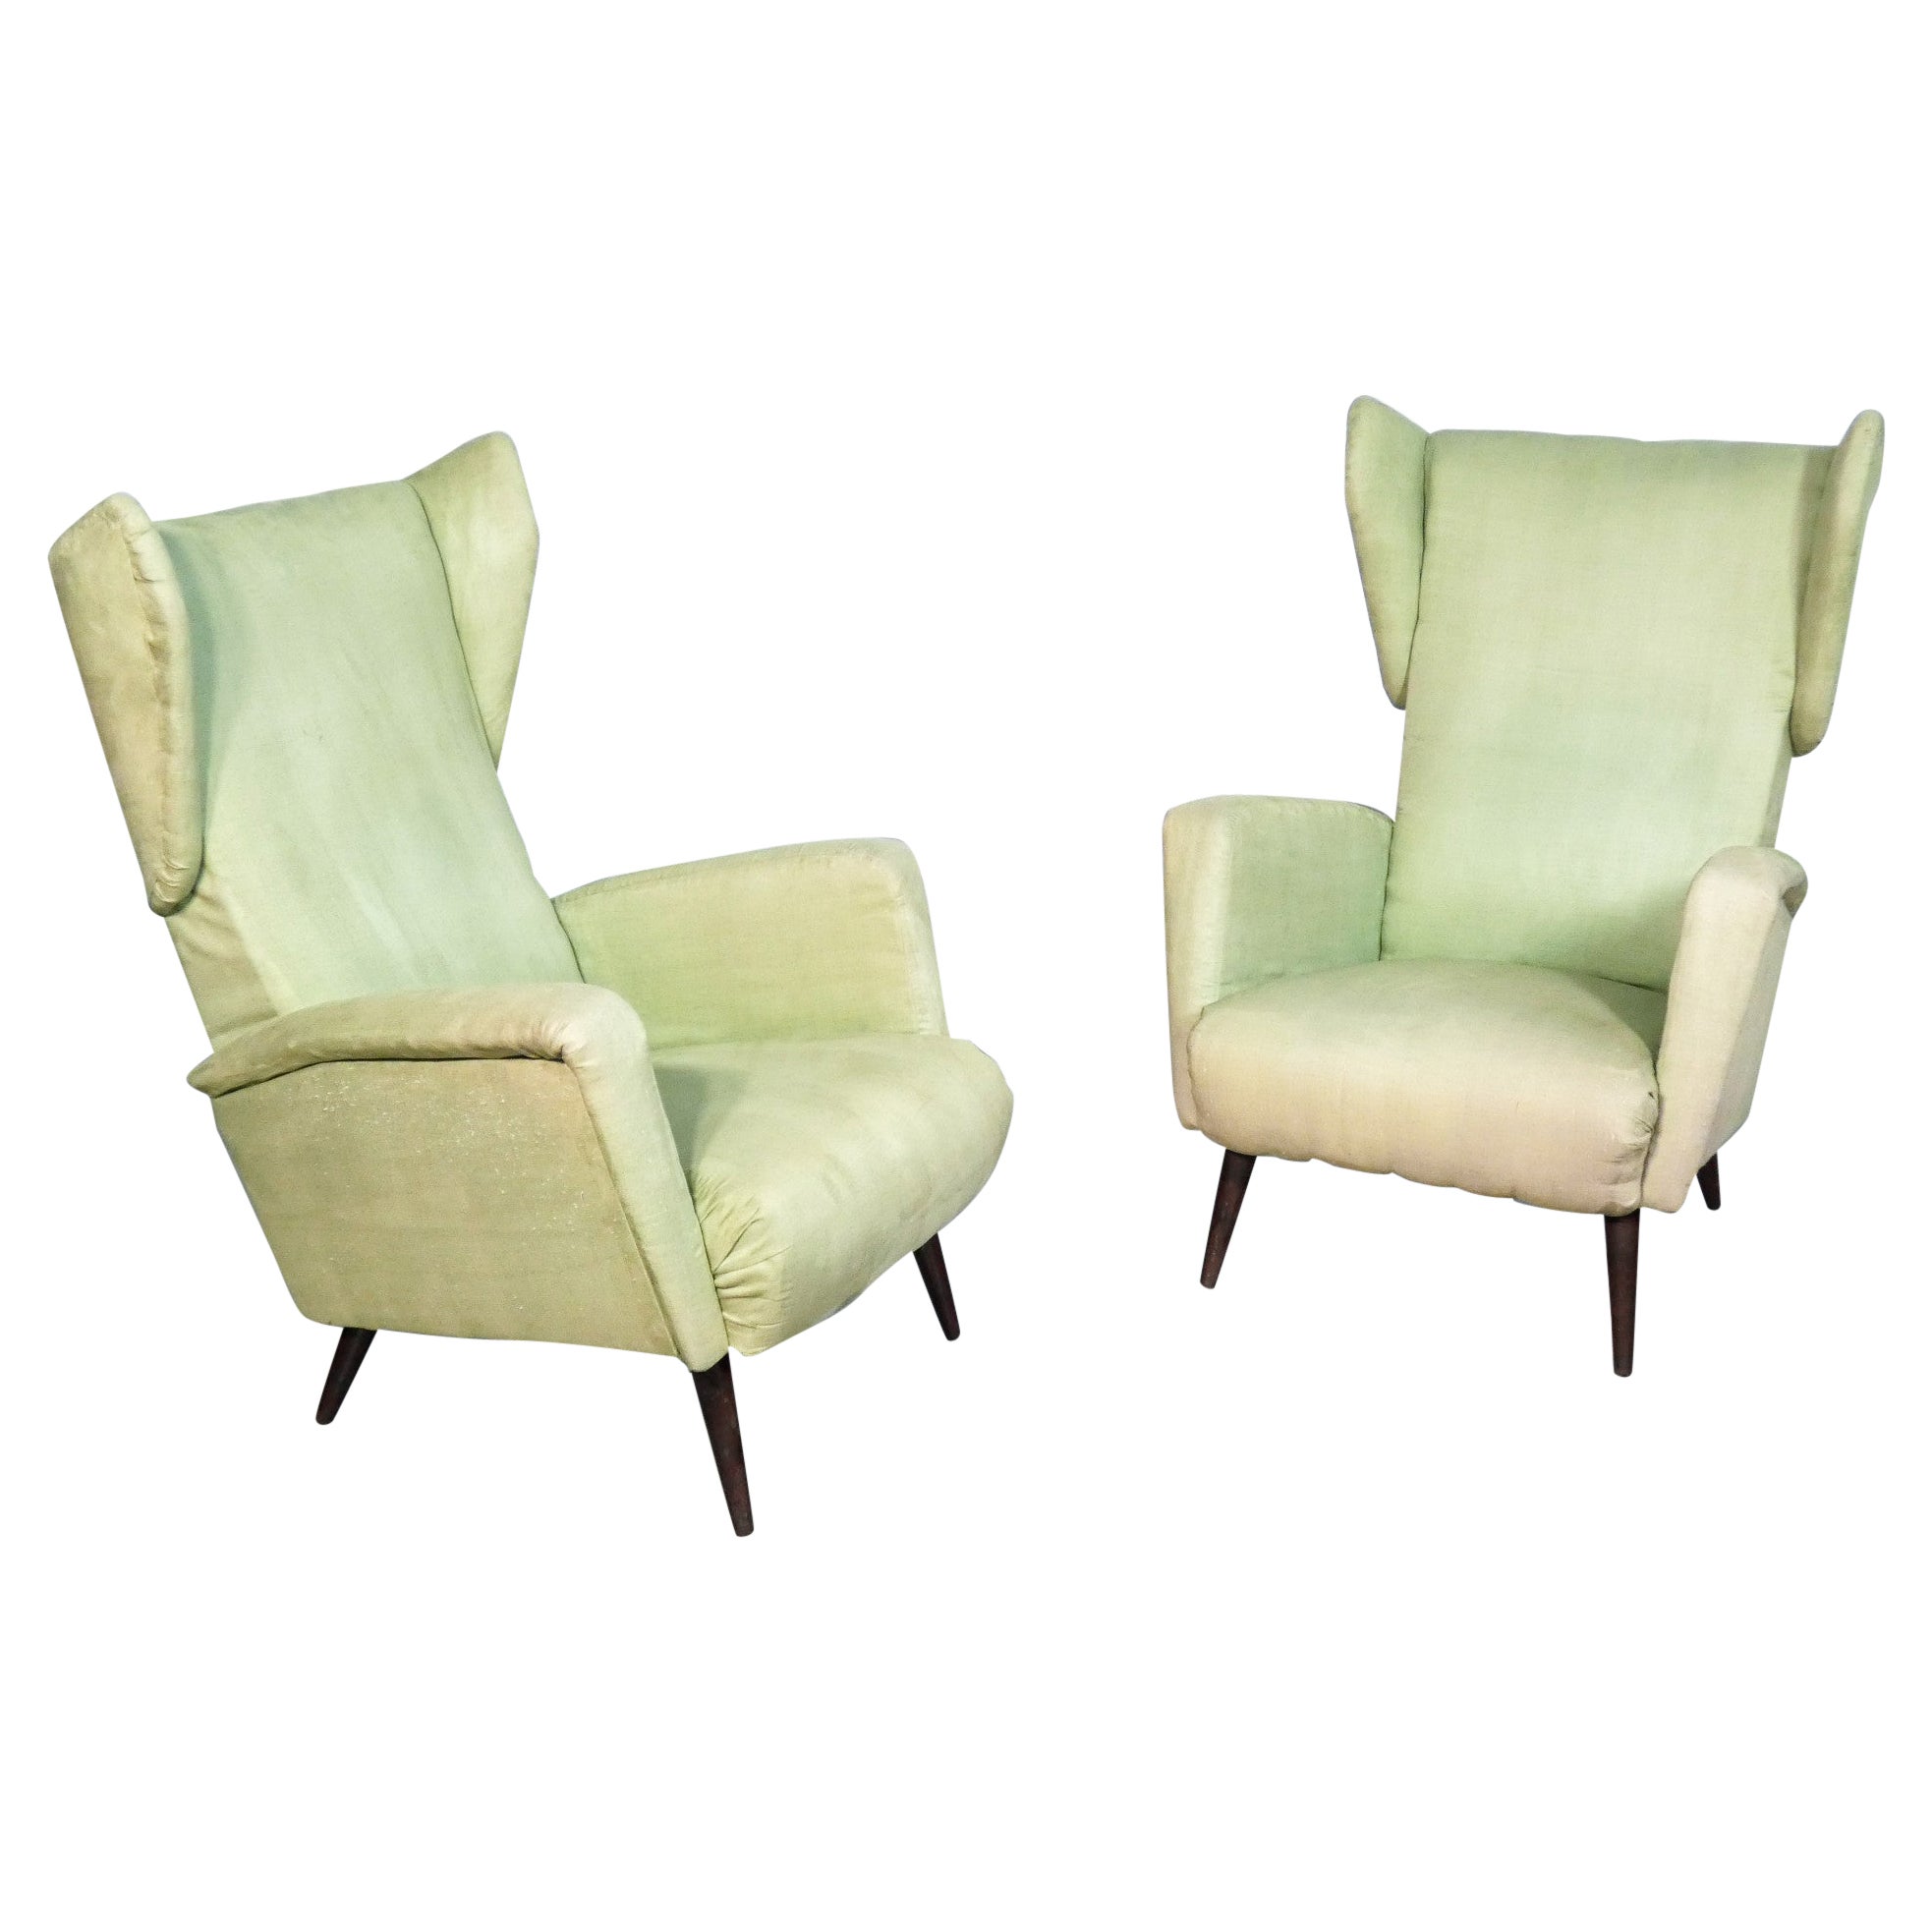 Pair of Armchairs, Design Giò Ponti for Cassina, 1950s, for Hotel Royal, Naples